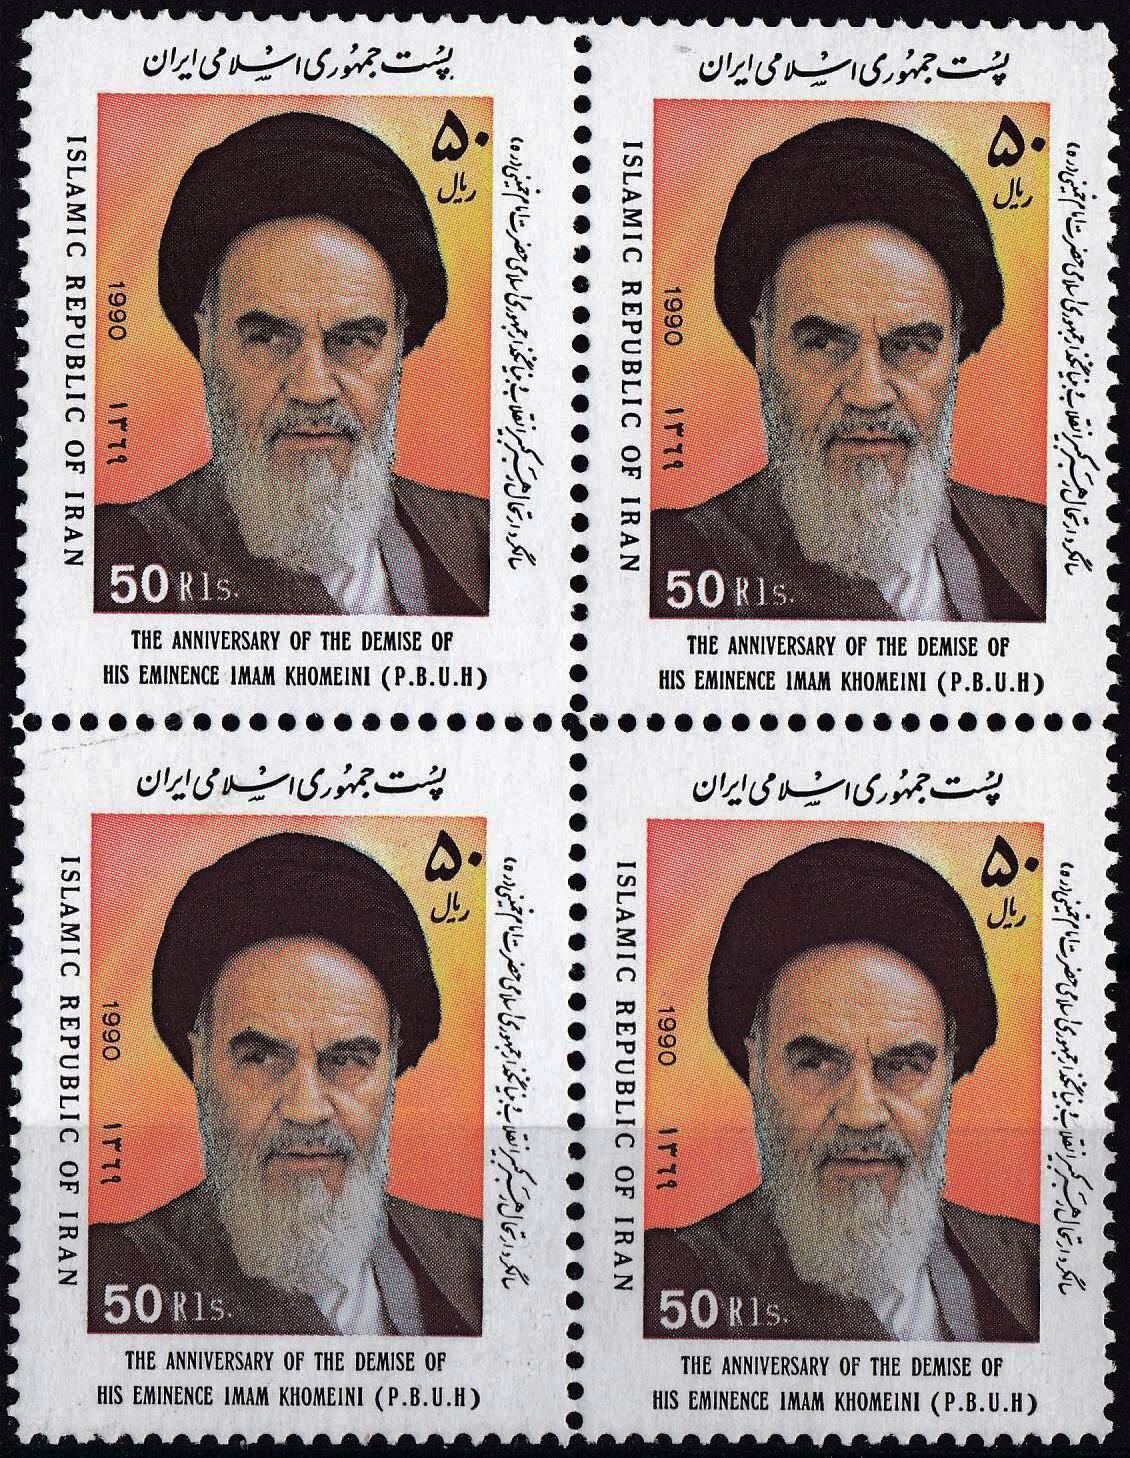 Iran 1968 Stamp Police Day MNH - Click Image to Close